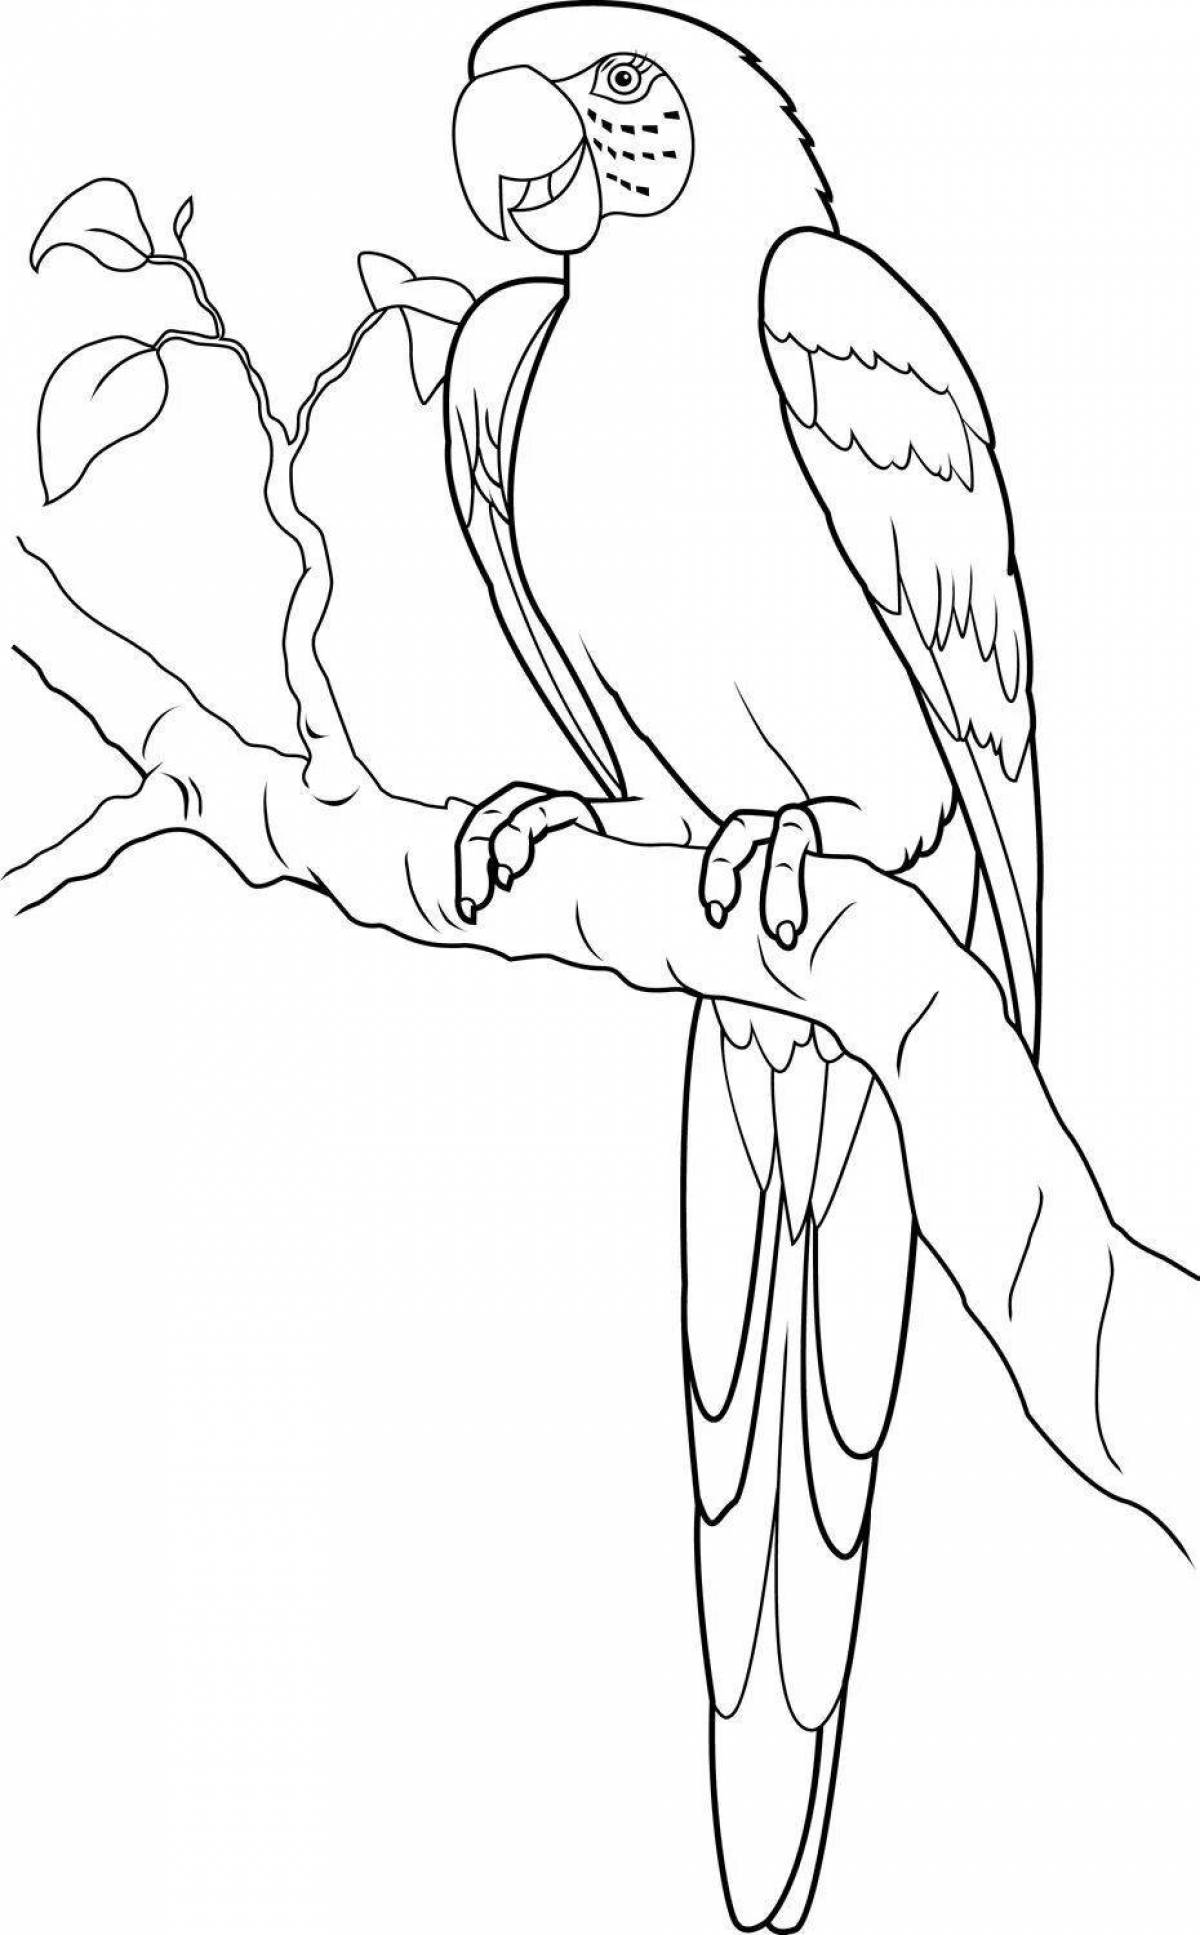 Brilliantly exquisite blue macaw coloring page